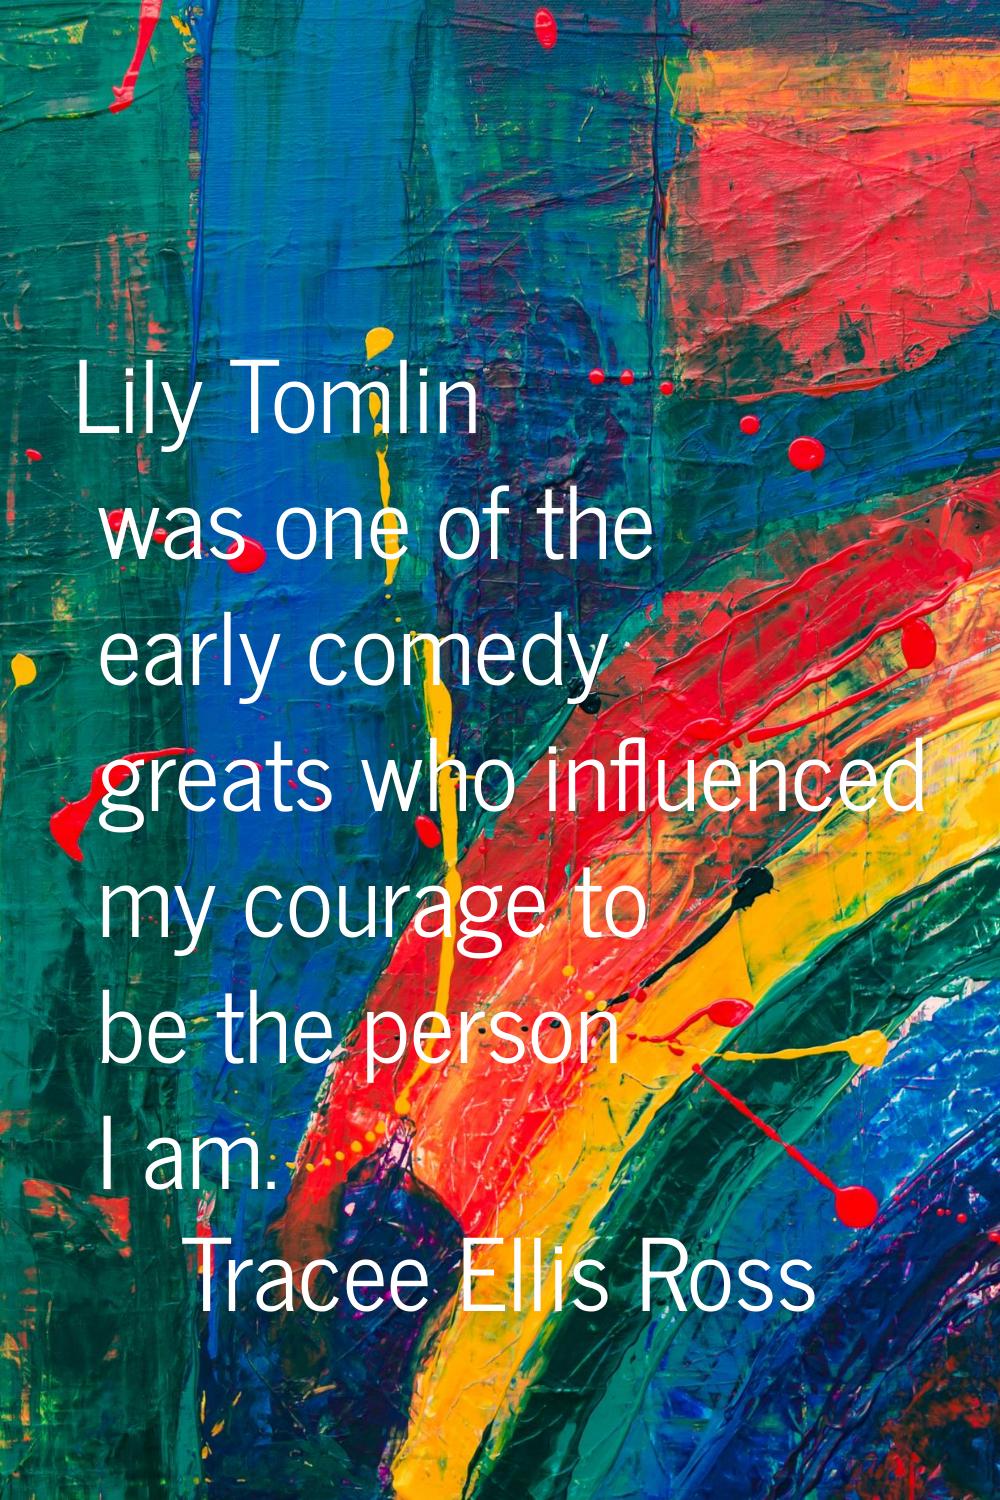 Lily Tomlin was one of the early comedy greats who influenced my courage to be the person I am.